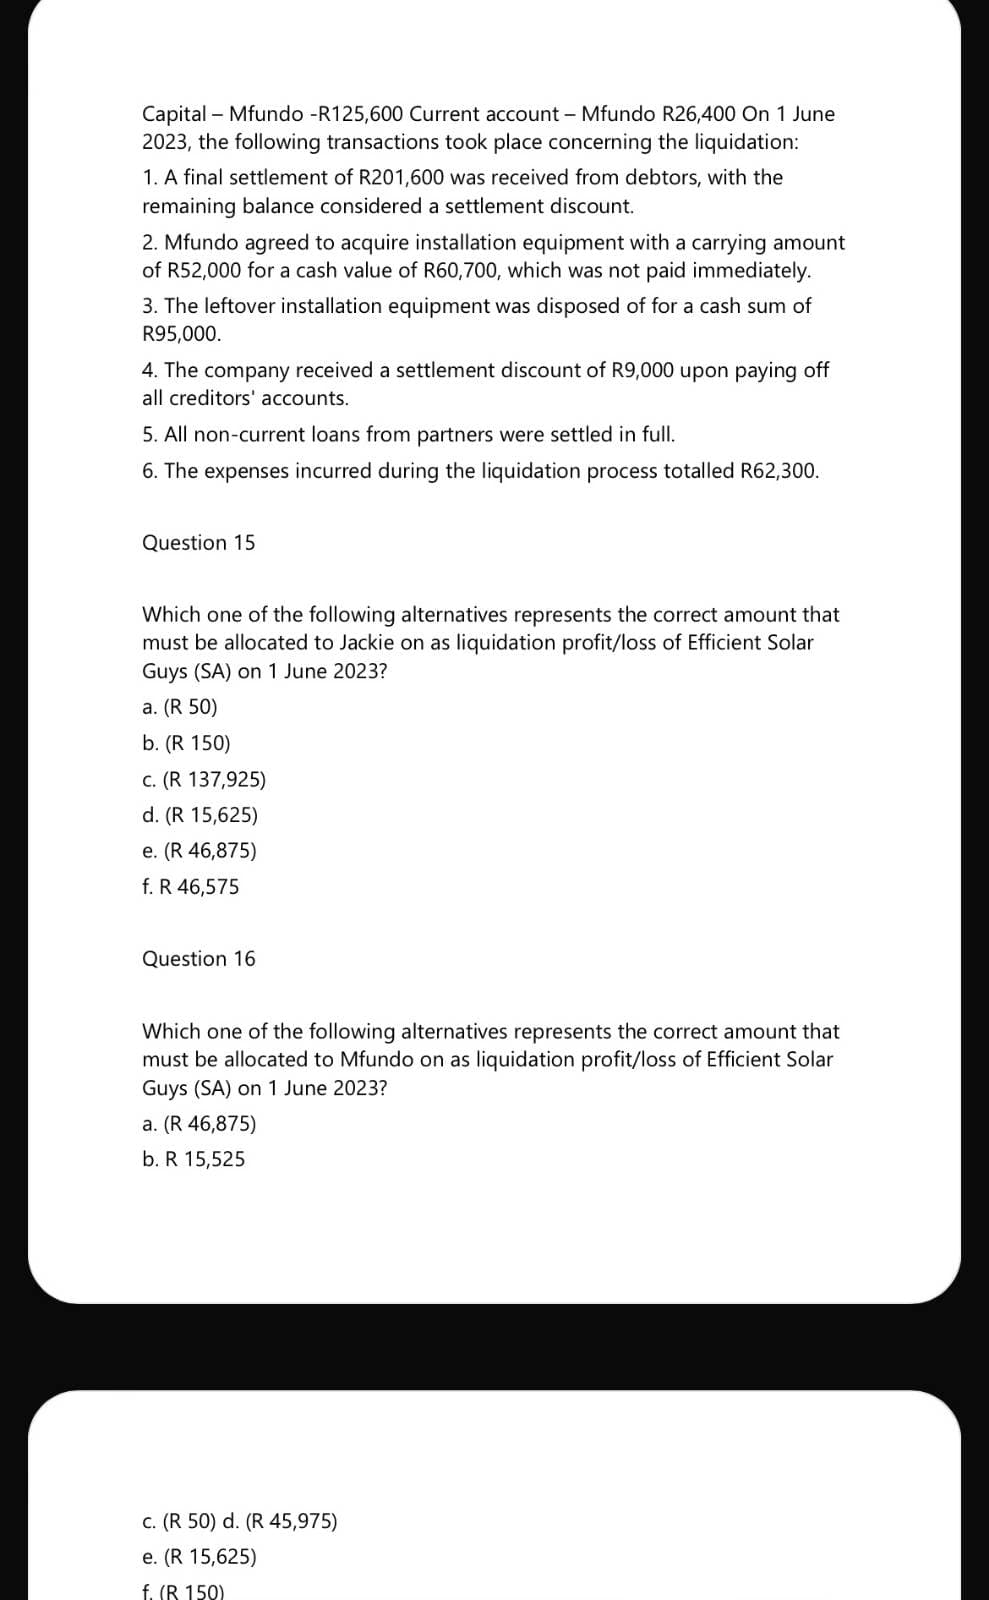 Capital
Mfundo -R125,600 Current account - Mfundo R26,400 On 1 June
2023, the following transactions took place concerning the liquidation:
1. A final settlement of R201,600 was received from debtors, with the
remaining balance considered a settlement discount.
2. Mfundo agreed to acquire installation equipment with a carrying amount
of R52,000 for a cash value of R60,700, which was not paid immediately.
3. The leftover installation equipment was disposed of for a cash sum of
R95,000.
4. The company received a settlement discount of R9,000 upon paying off
all creditors' accounts.
5. All non-current loans from partners were settled in full.
6. The expenses incurred during the liquidation process totalled R62,300.
Question 15
Which one of the following alternatives represents the correct amount that
must be allocated to Jackie on as liquidation profit/loss of Efficient Solar
Guys (SA) on 1 June 2023?
a. (R 50)
b. (R 150)
c. (R 137,925)
d. (R 15,625)
e. (R 46,875)
f. R 46,575
Question 16
Which one of the following alternatives represents the correct amount that
must be allocated to Mfundo on as liquidation profit/loss of Efficient Solar
Guys (SA) on 1 June 2023?
a. (R 46,875)
b. R 15,525
c. (R 50) d. (R 45,975)
e. (R 15,625)
f. (R 150)